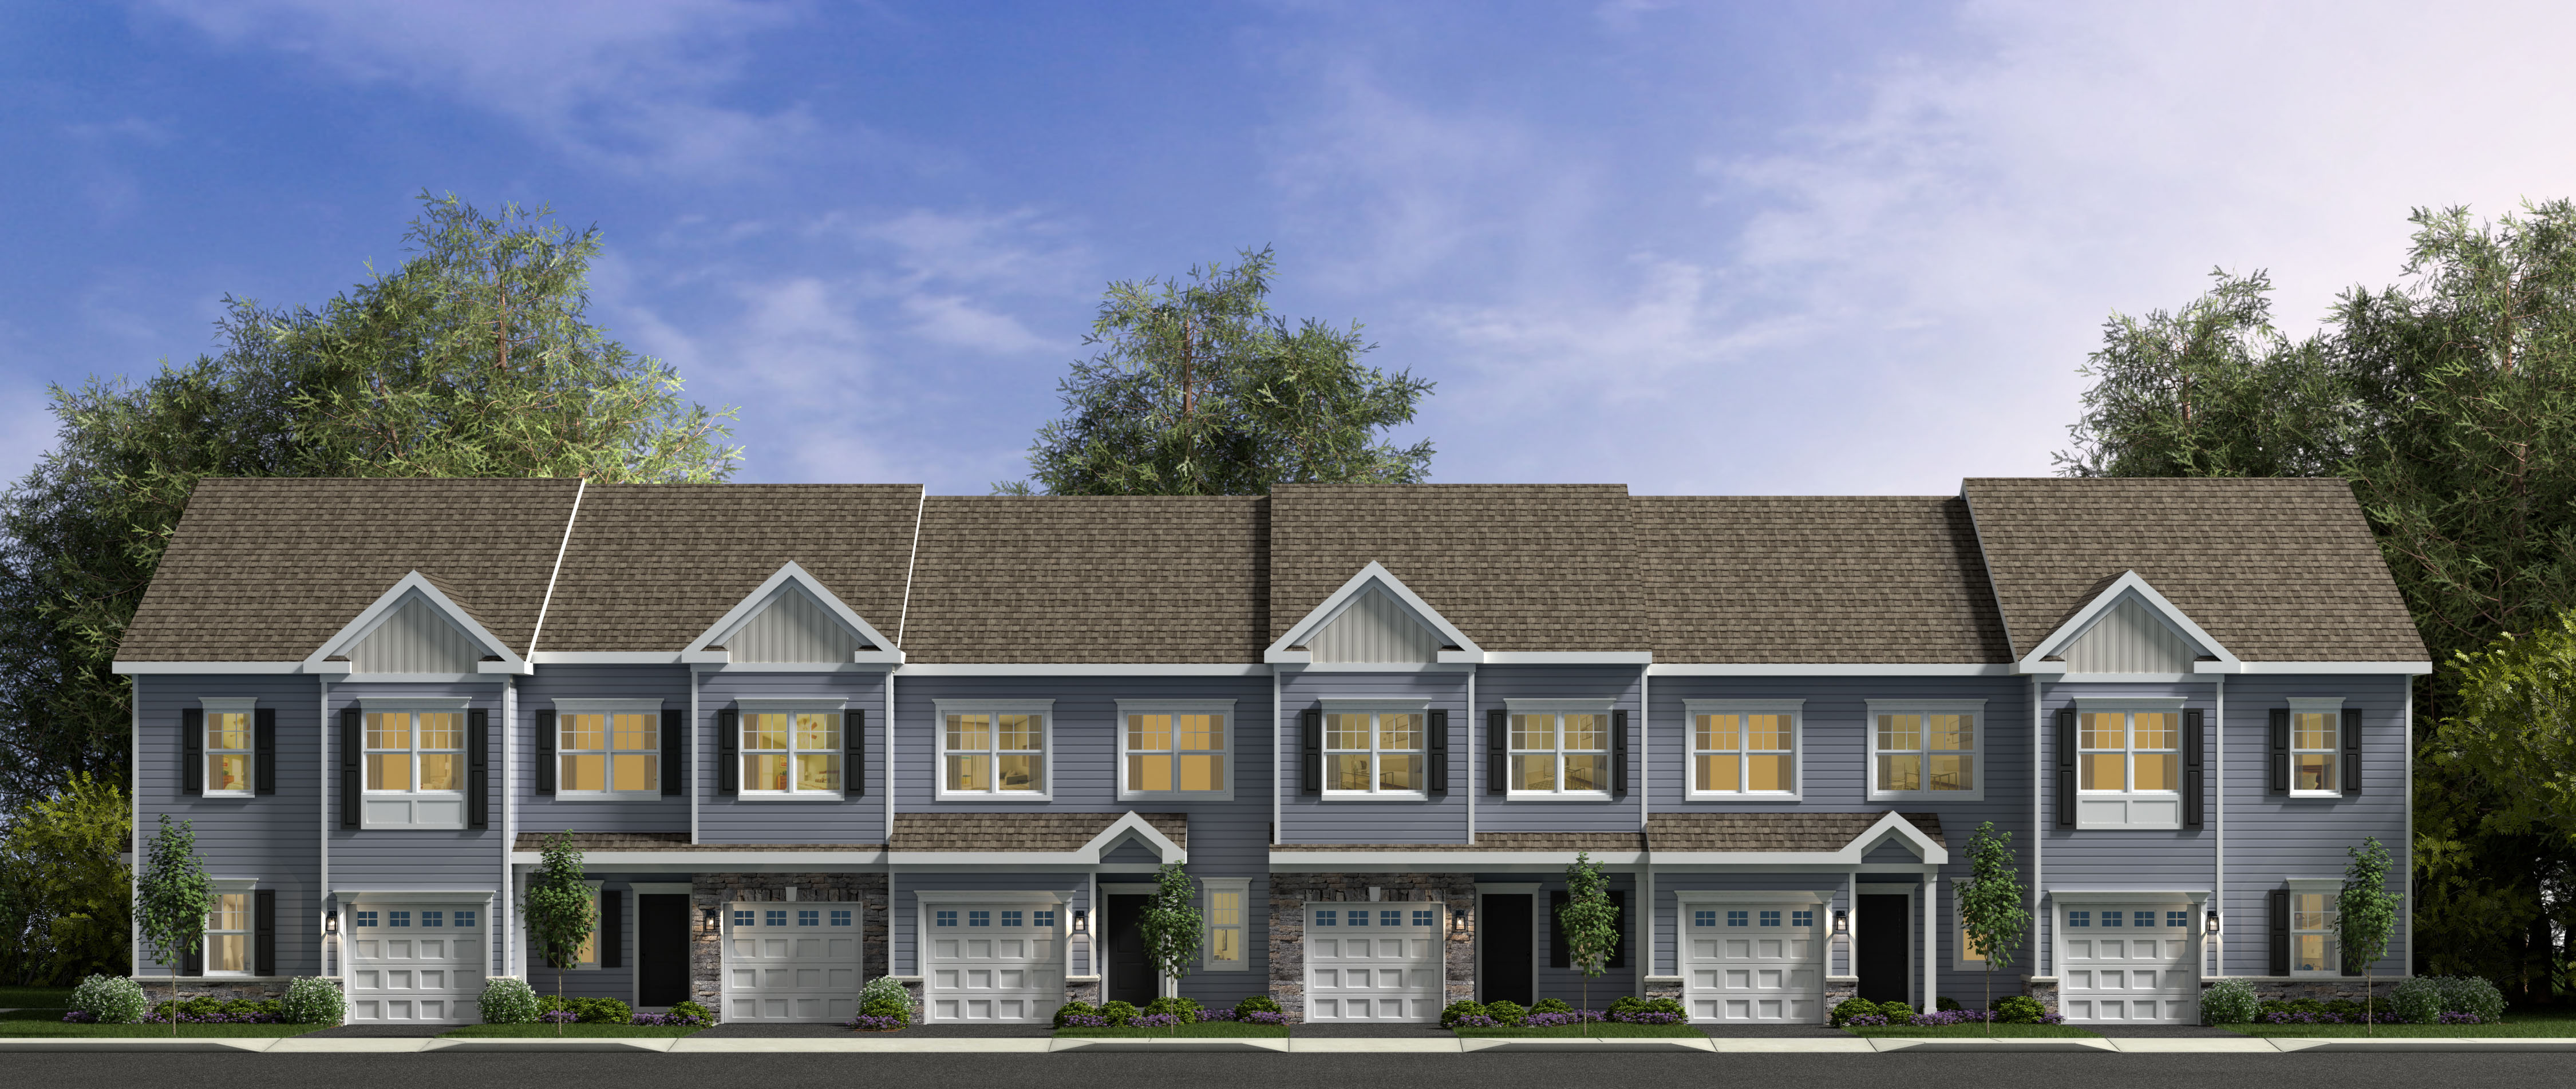 The townhomes at Traditions at Wall